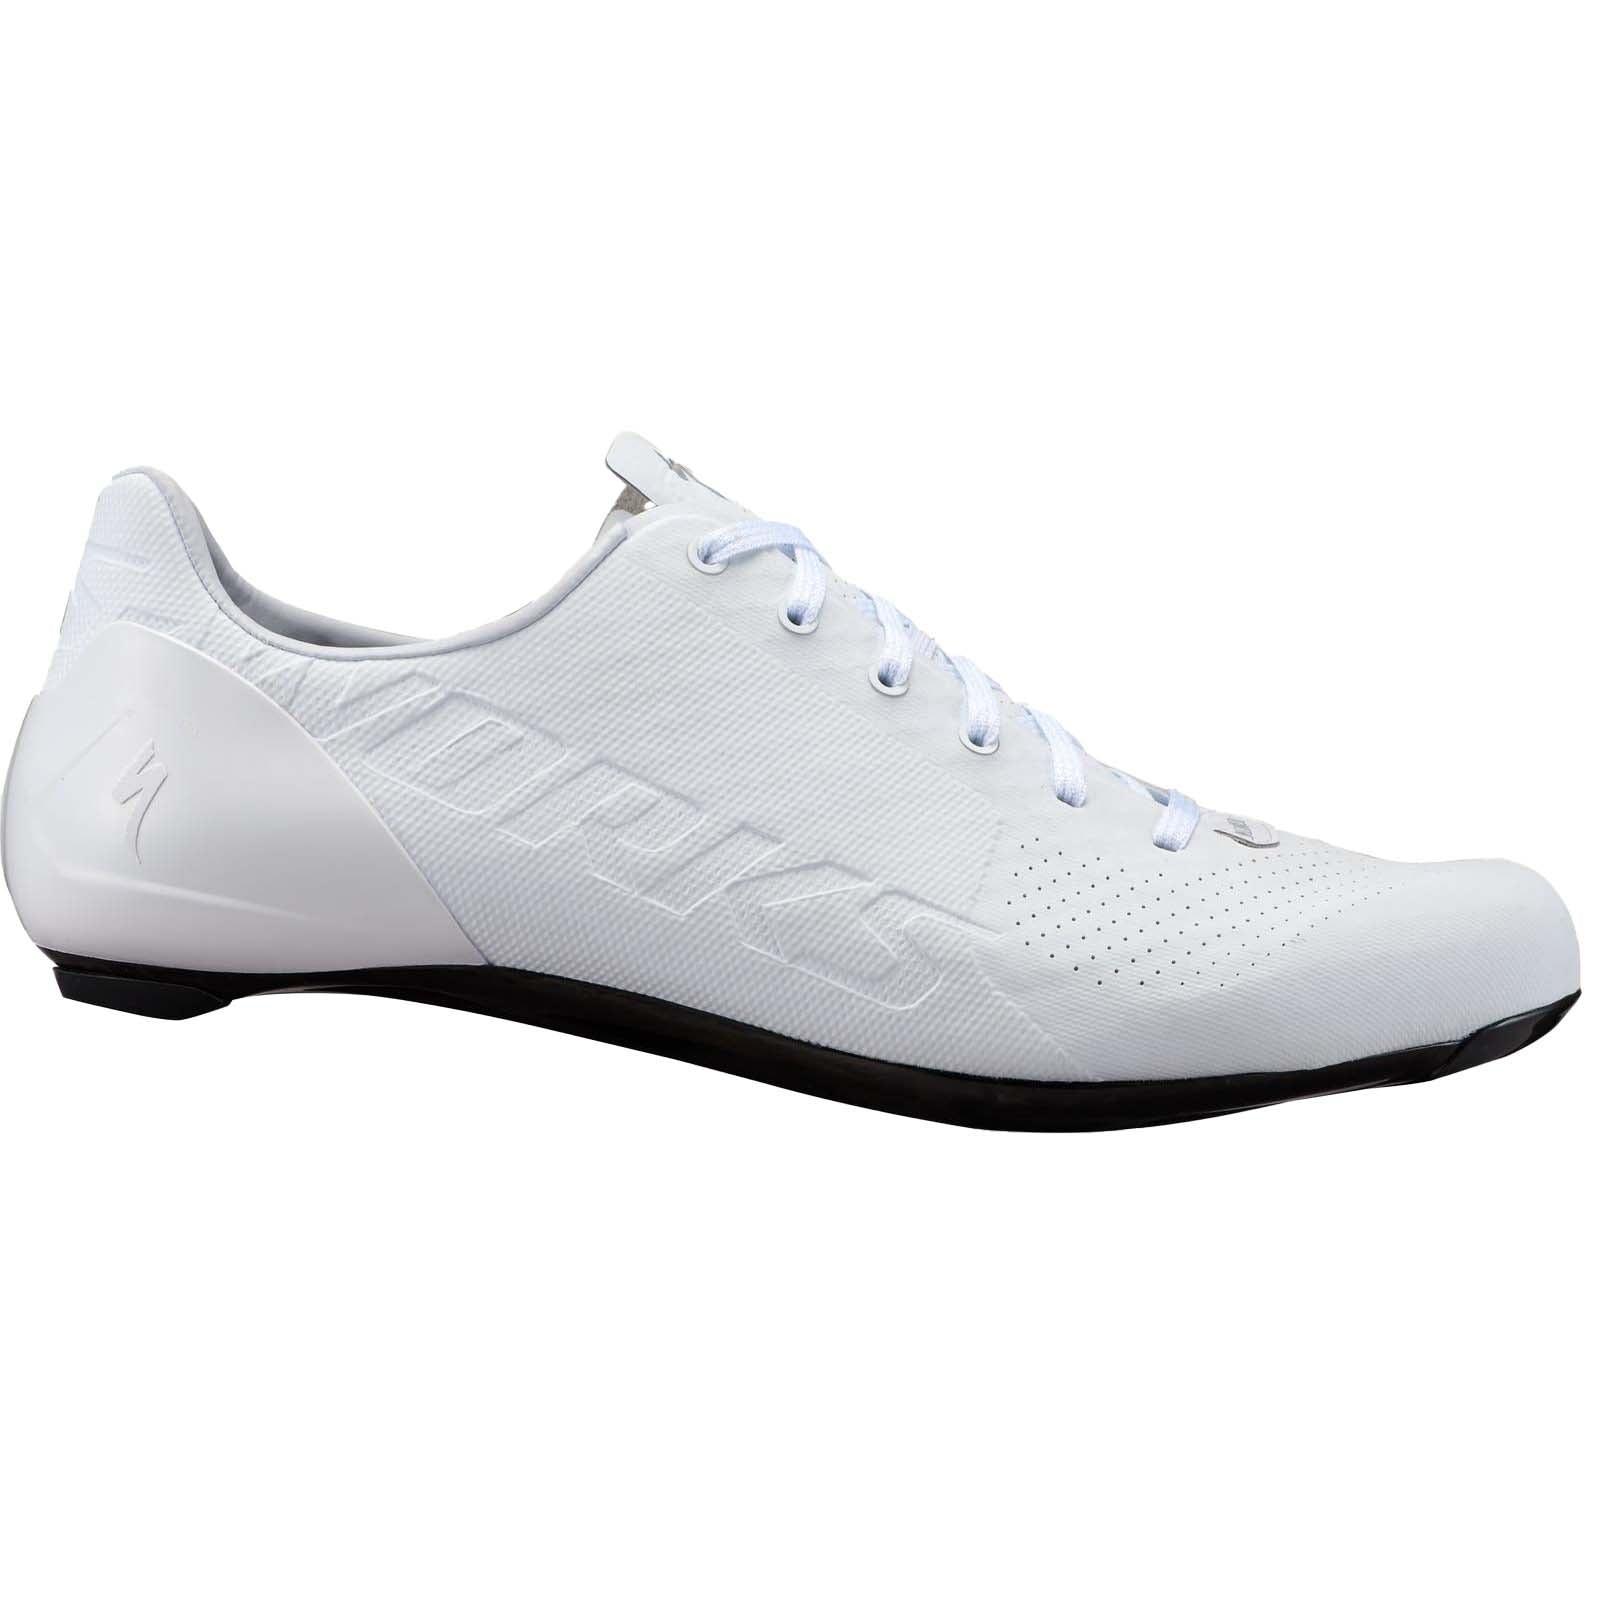 S-Works 7 Lace Road Shoes